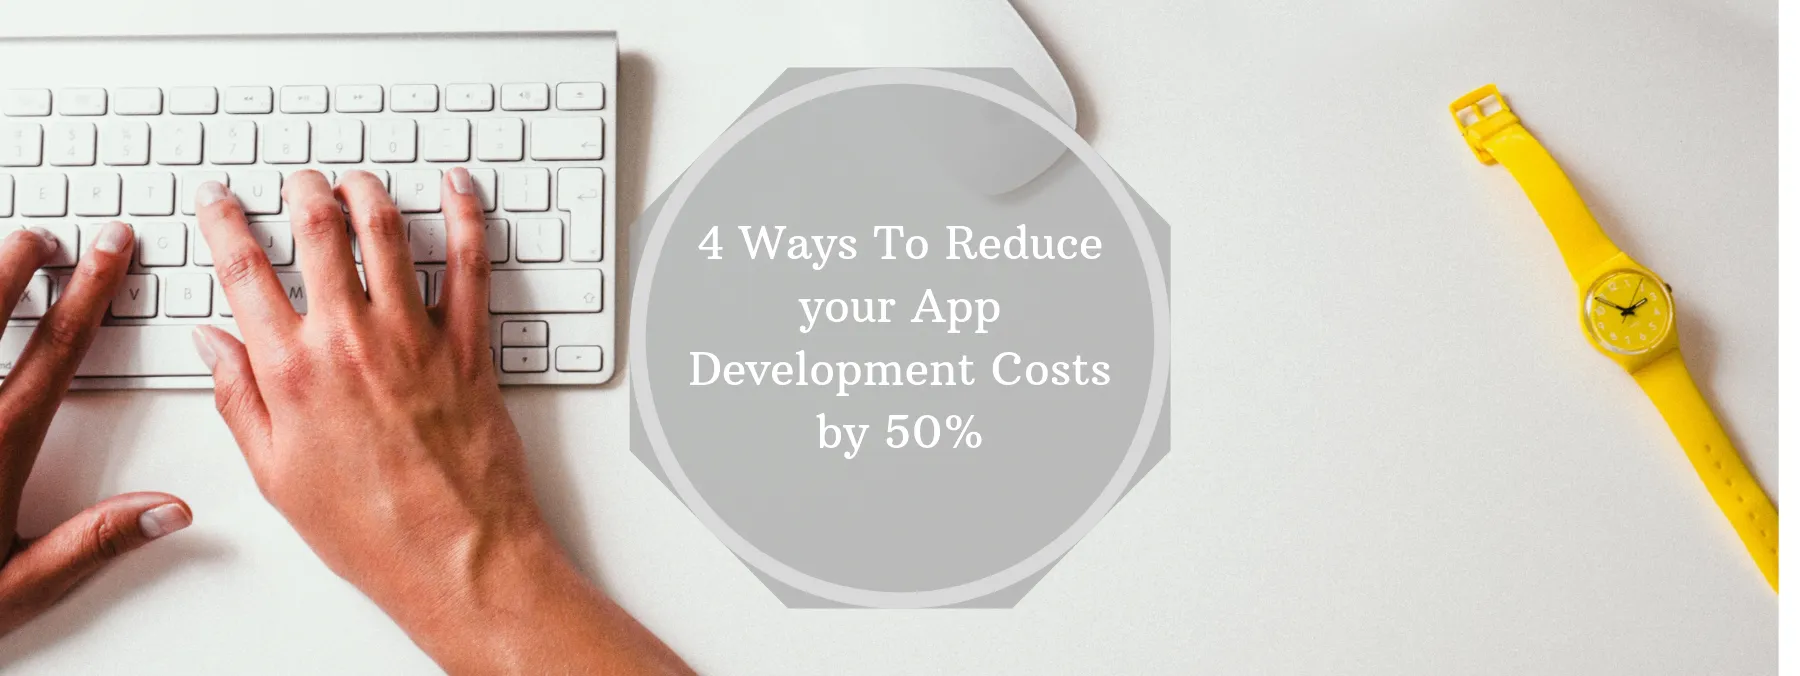 4 Ways To Reduce your App Development Costs by 50%